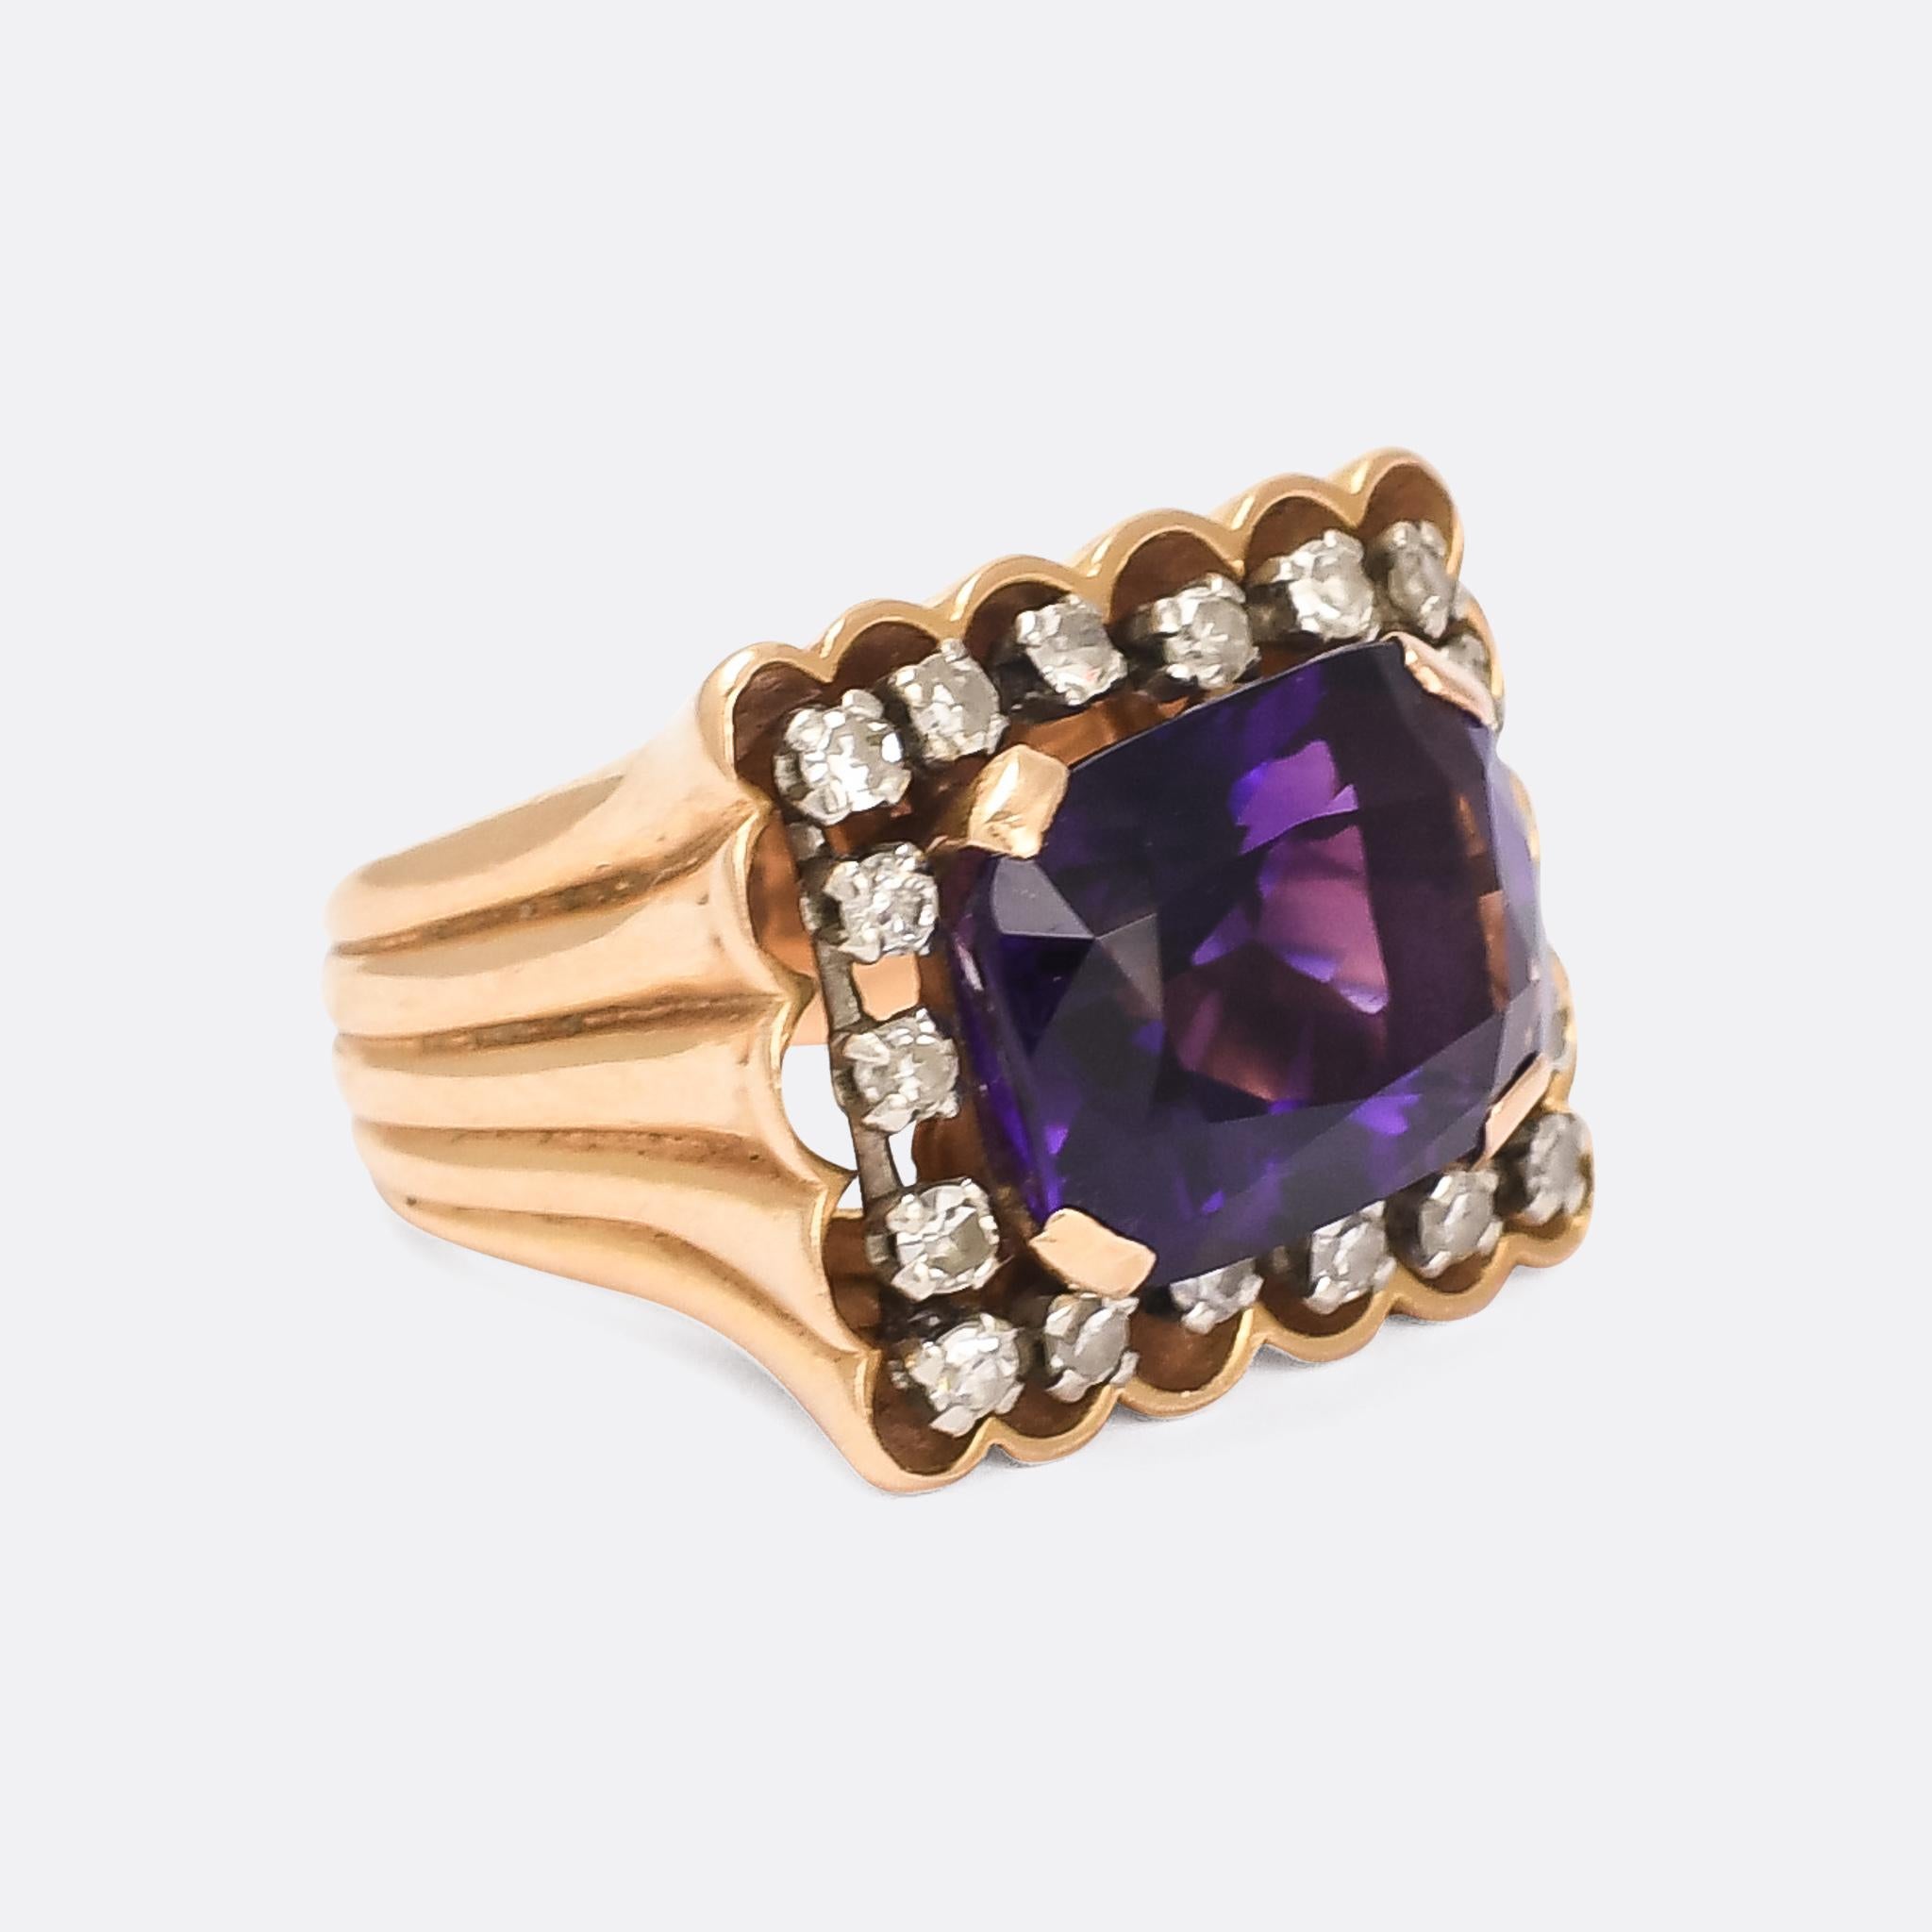 A cool vintage siberian amethyst and diamond statement ring dating from the 1970s. The central cushion cut stone weighs 6.8 carats, and is surrounded by a border of single cut diamonds. Crafted in 18 karat gold throughout and particularly good